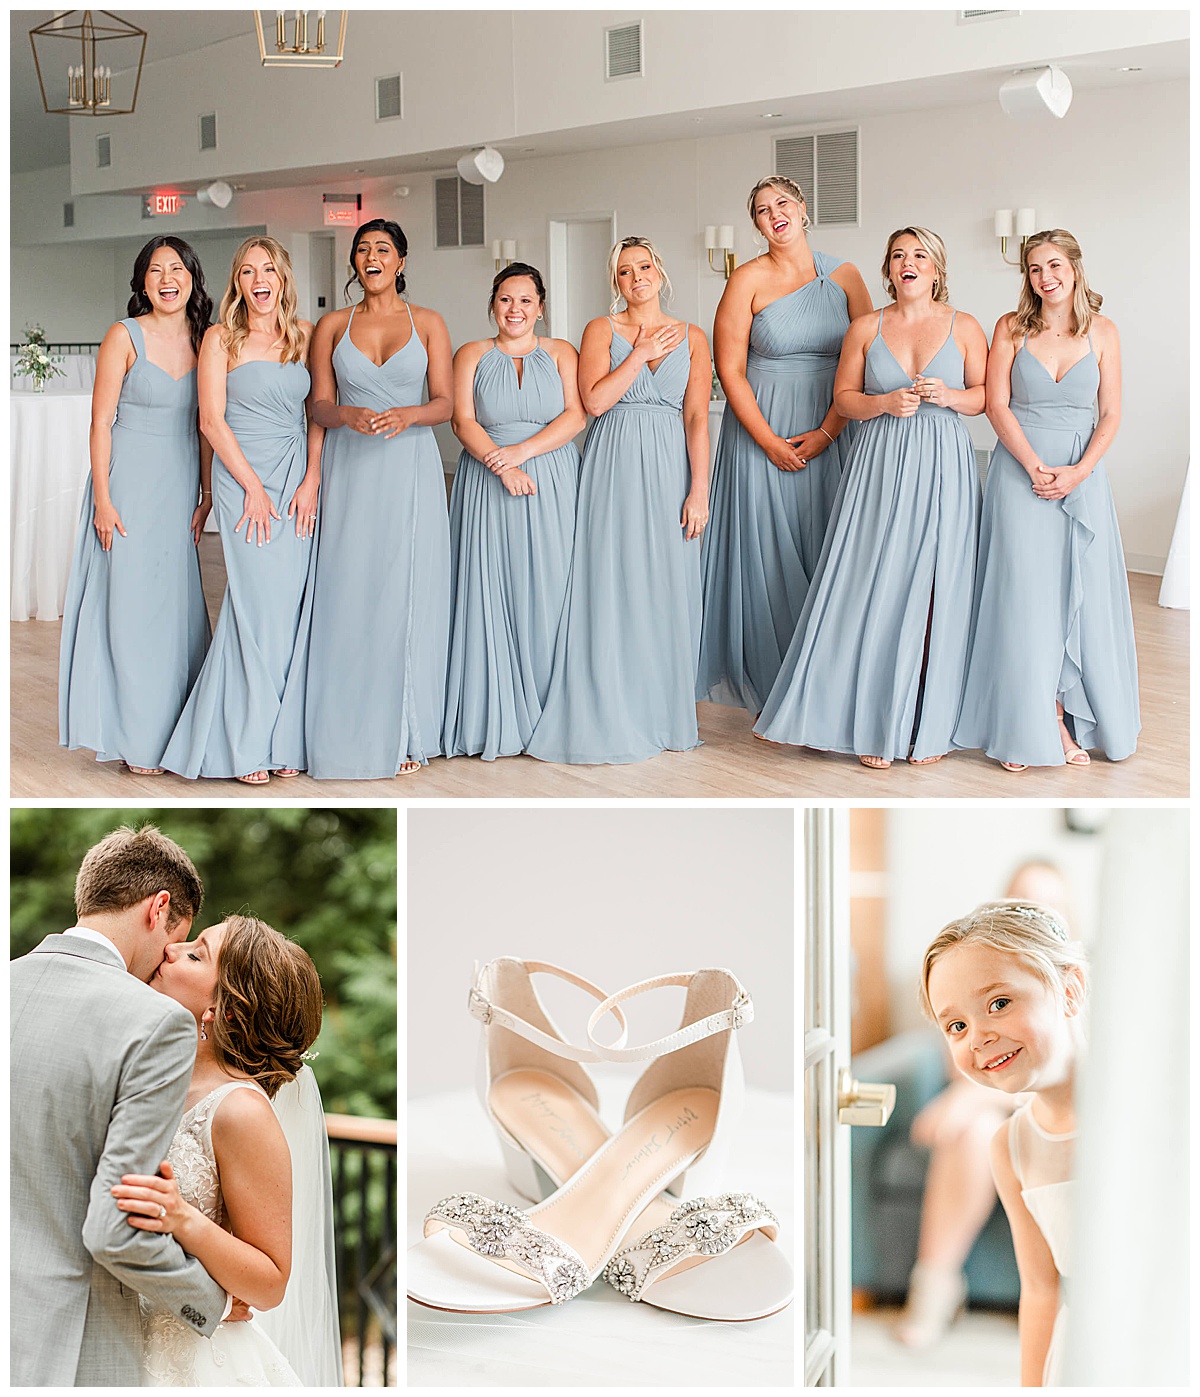 photos from a wedding day featuring wedding timeline tips